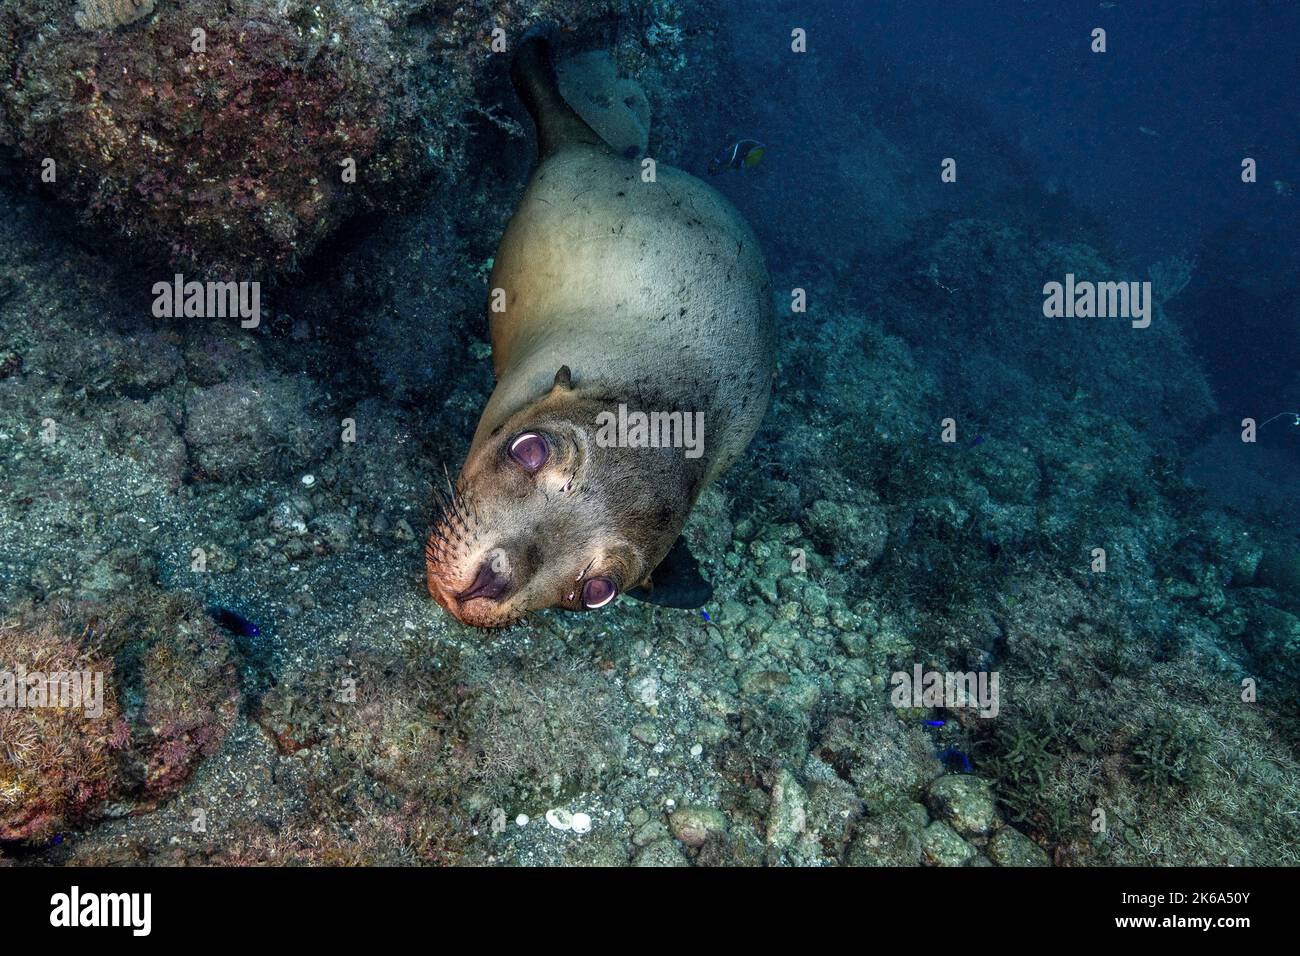 A California sea lion looks up with puppy dog eyes, Sea of Cortez. Stock Photo